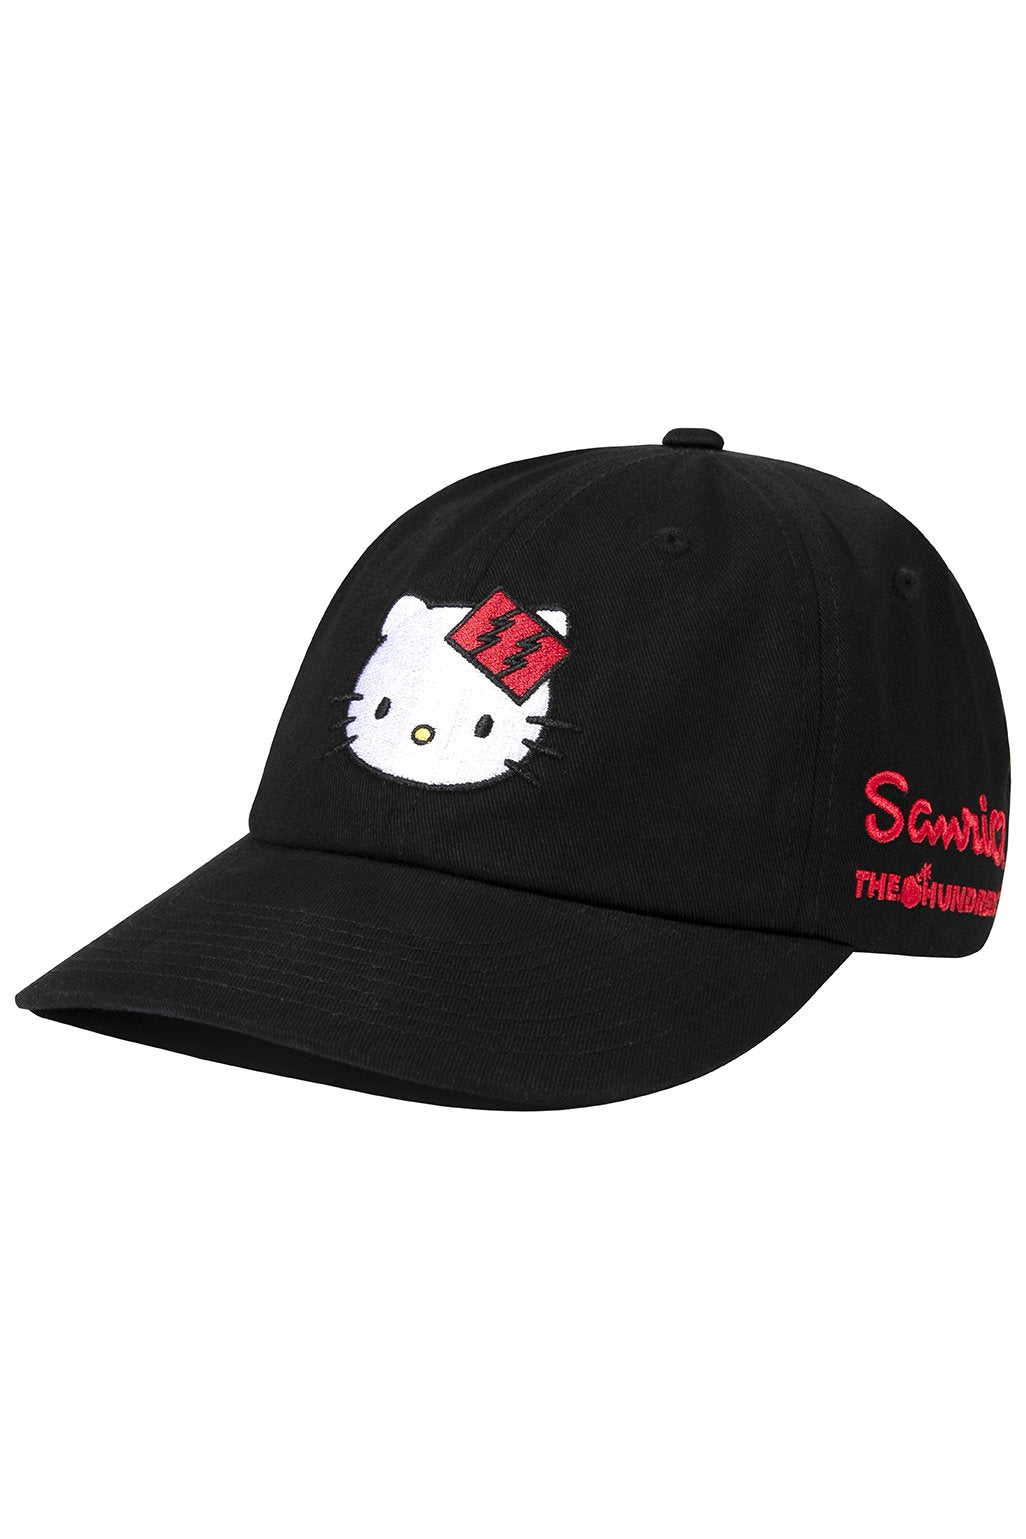 The Hundreds x Sanrio Hello Kitty Dad Hat in Black